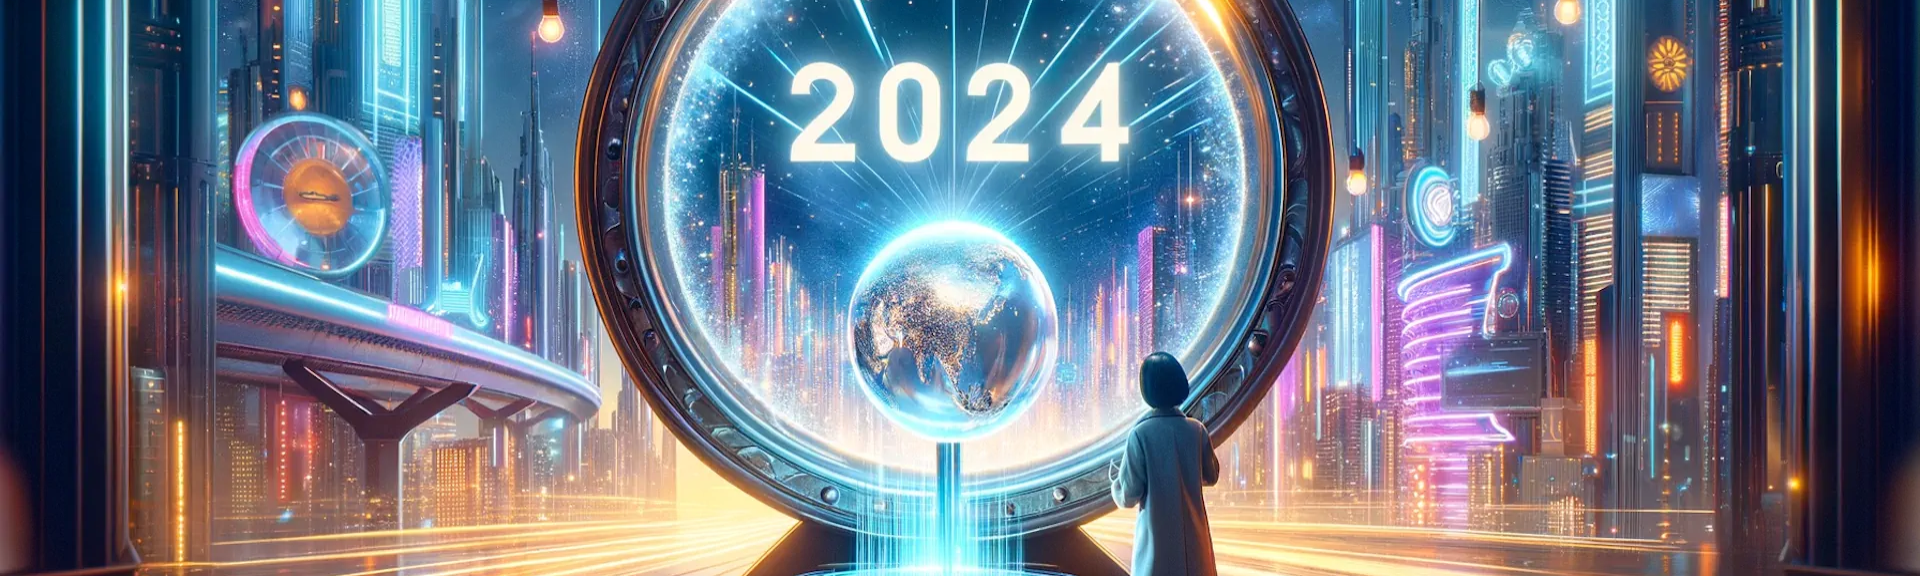 , inspiring, and bright cinematic header image for a blog post titled 'Top AI Trends for 2024' The scene features a time machine with sleek